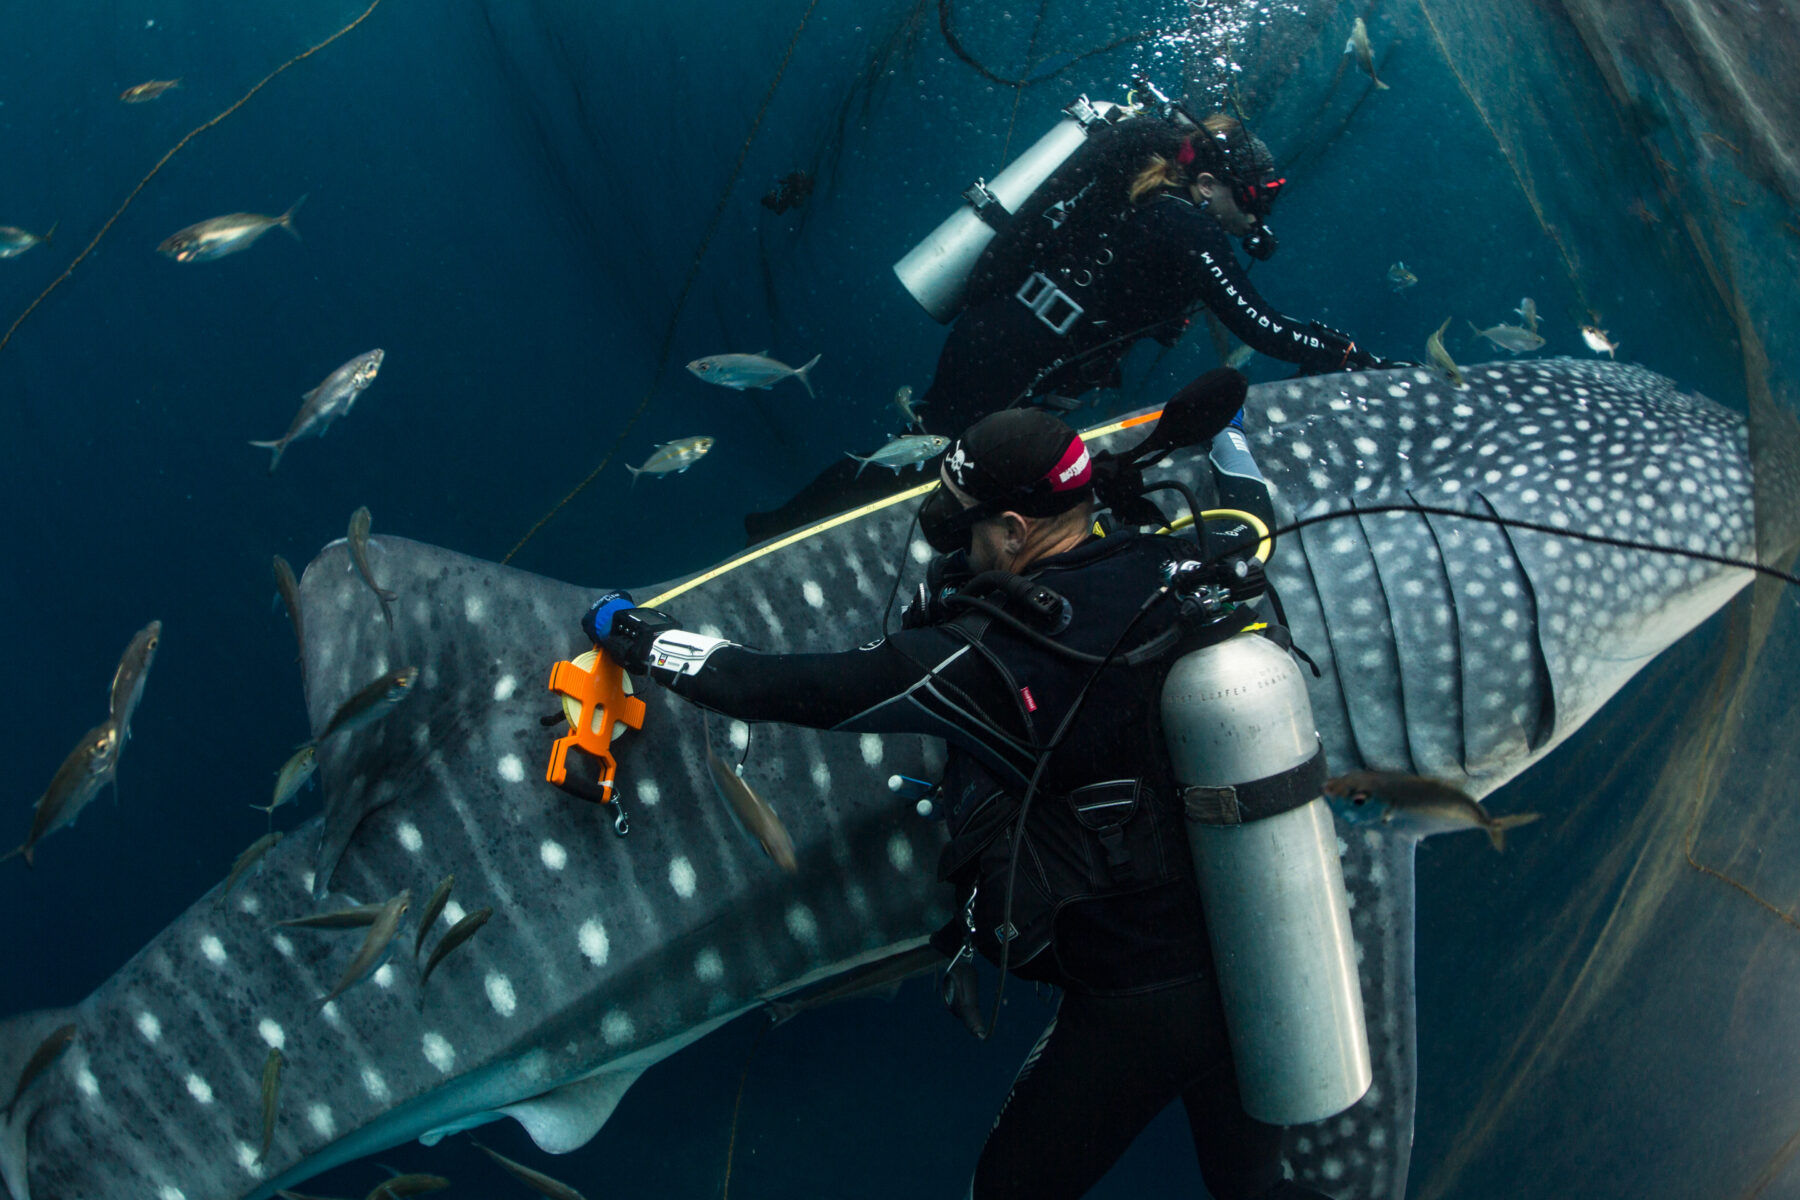 Whale shark measuring and tagging, Cenderawasih Bay, Indonesia